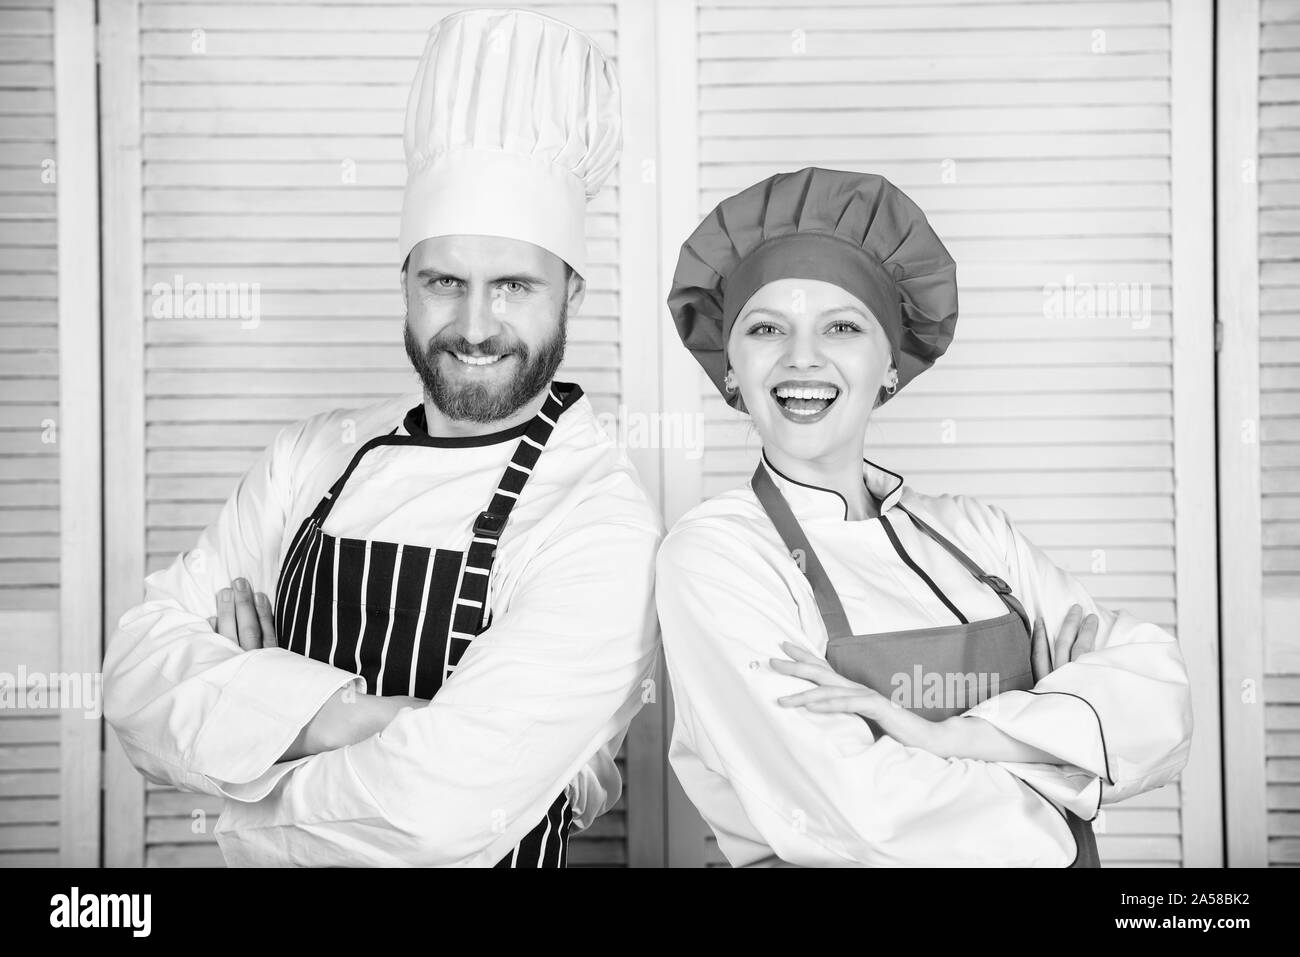 Kitchen boss. secret ingredient by recipe. cook uniform. man and woman chef in restaurant. Family cooking. Menu planning. culinary cuisine. couple in love with perfect food. Is under control. Stock Photo